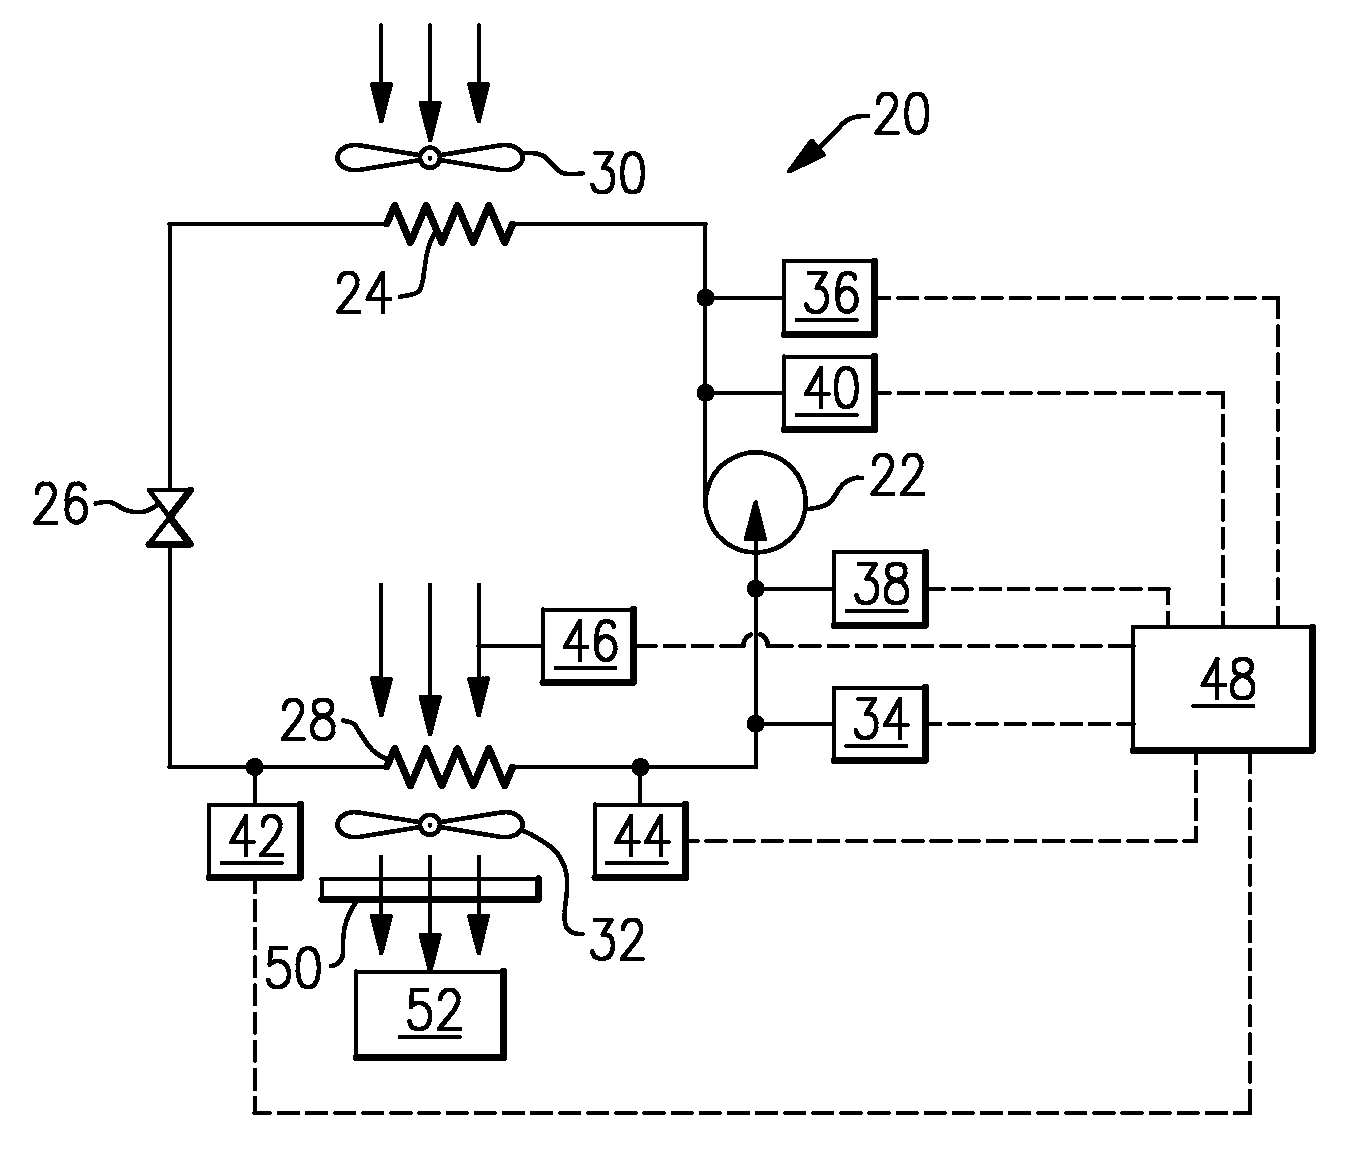 Method for detecting a fault in an HVAC system